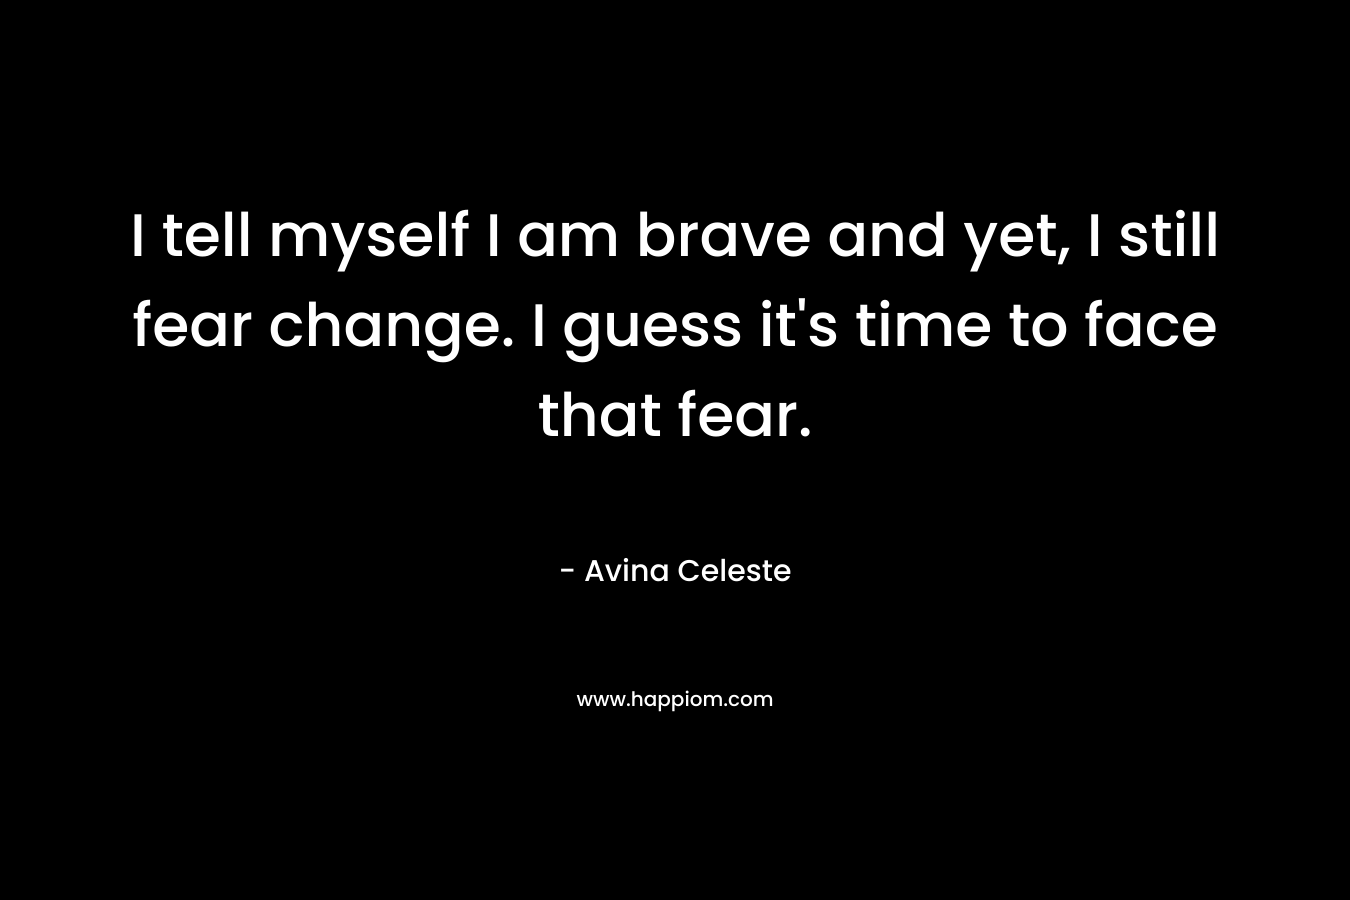 I tell myself I am brave and yet, I still fear change. I guess it's time to face that fear.